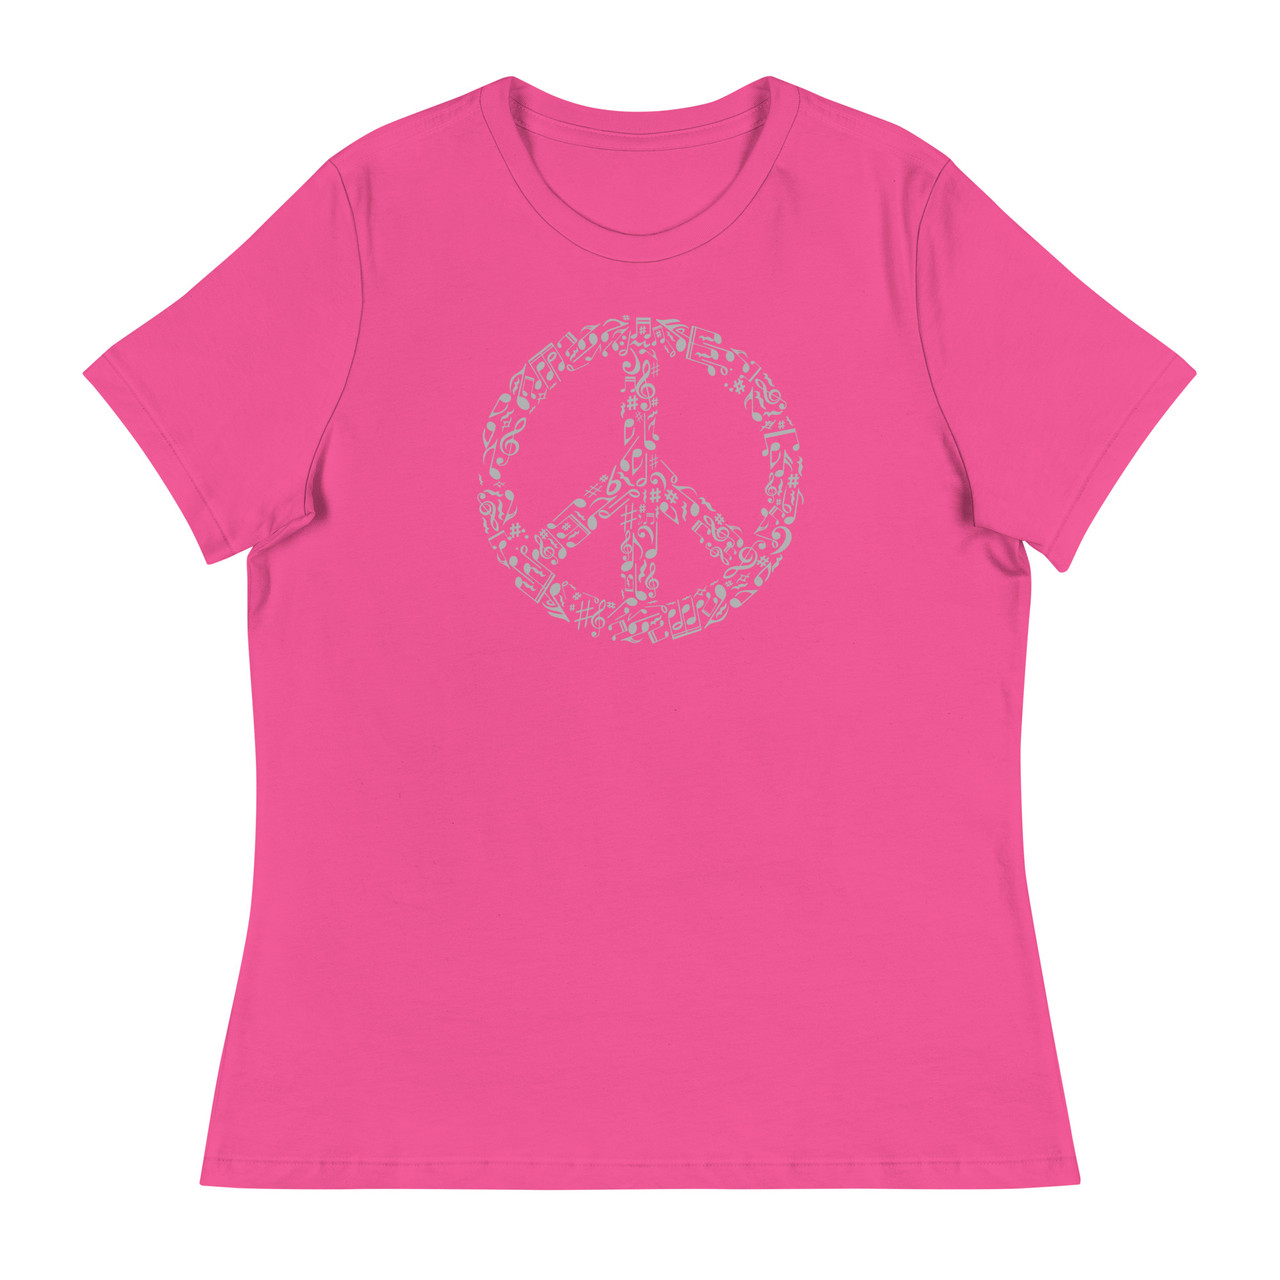 Rhyme In Peace Women's Relaxed T-Shirt - Bella + Canvas 6400 